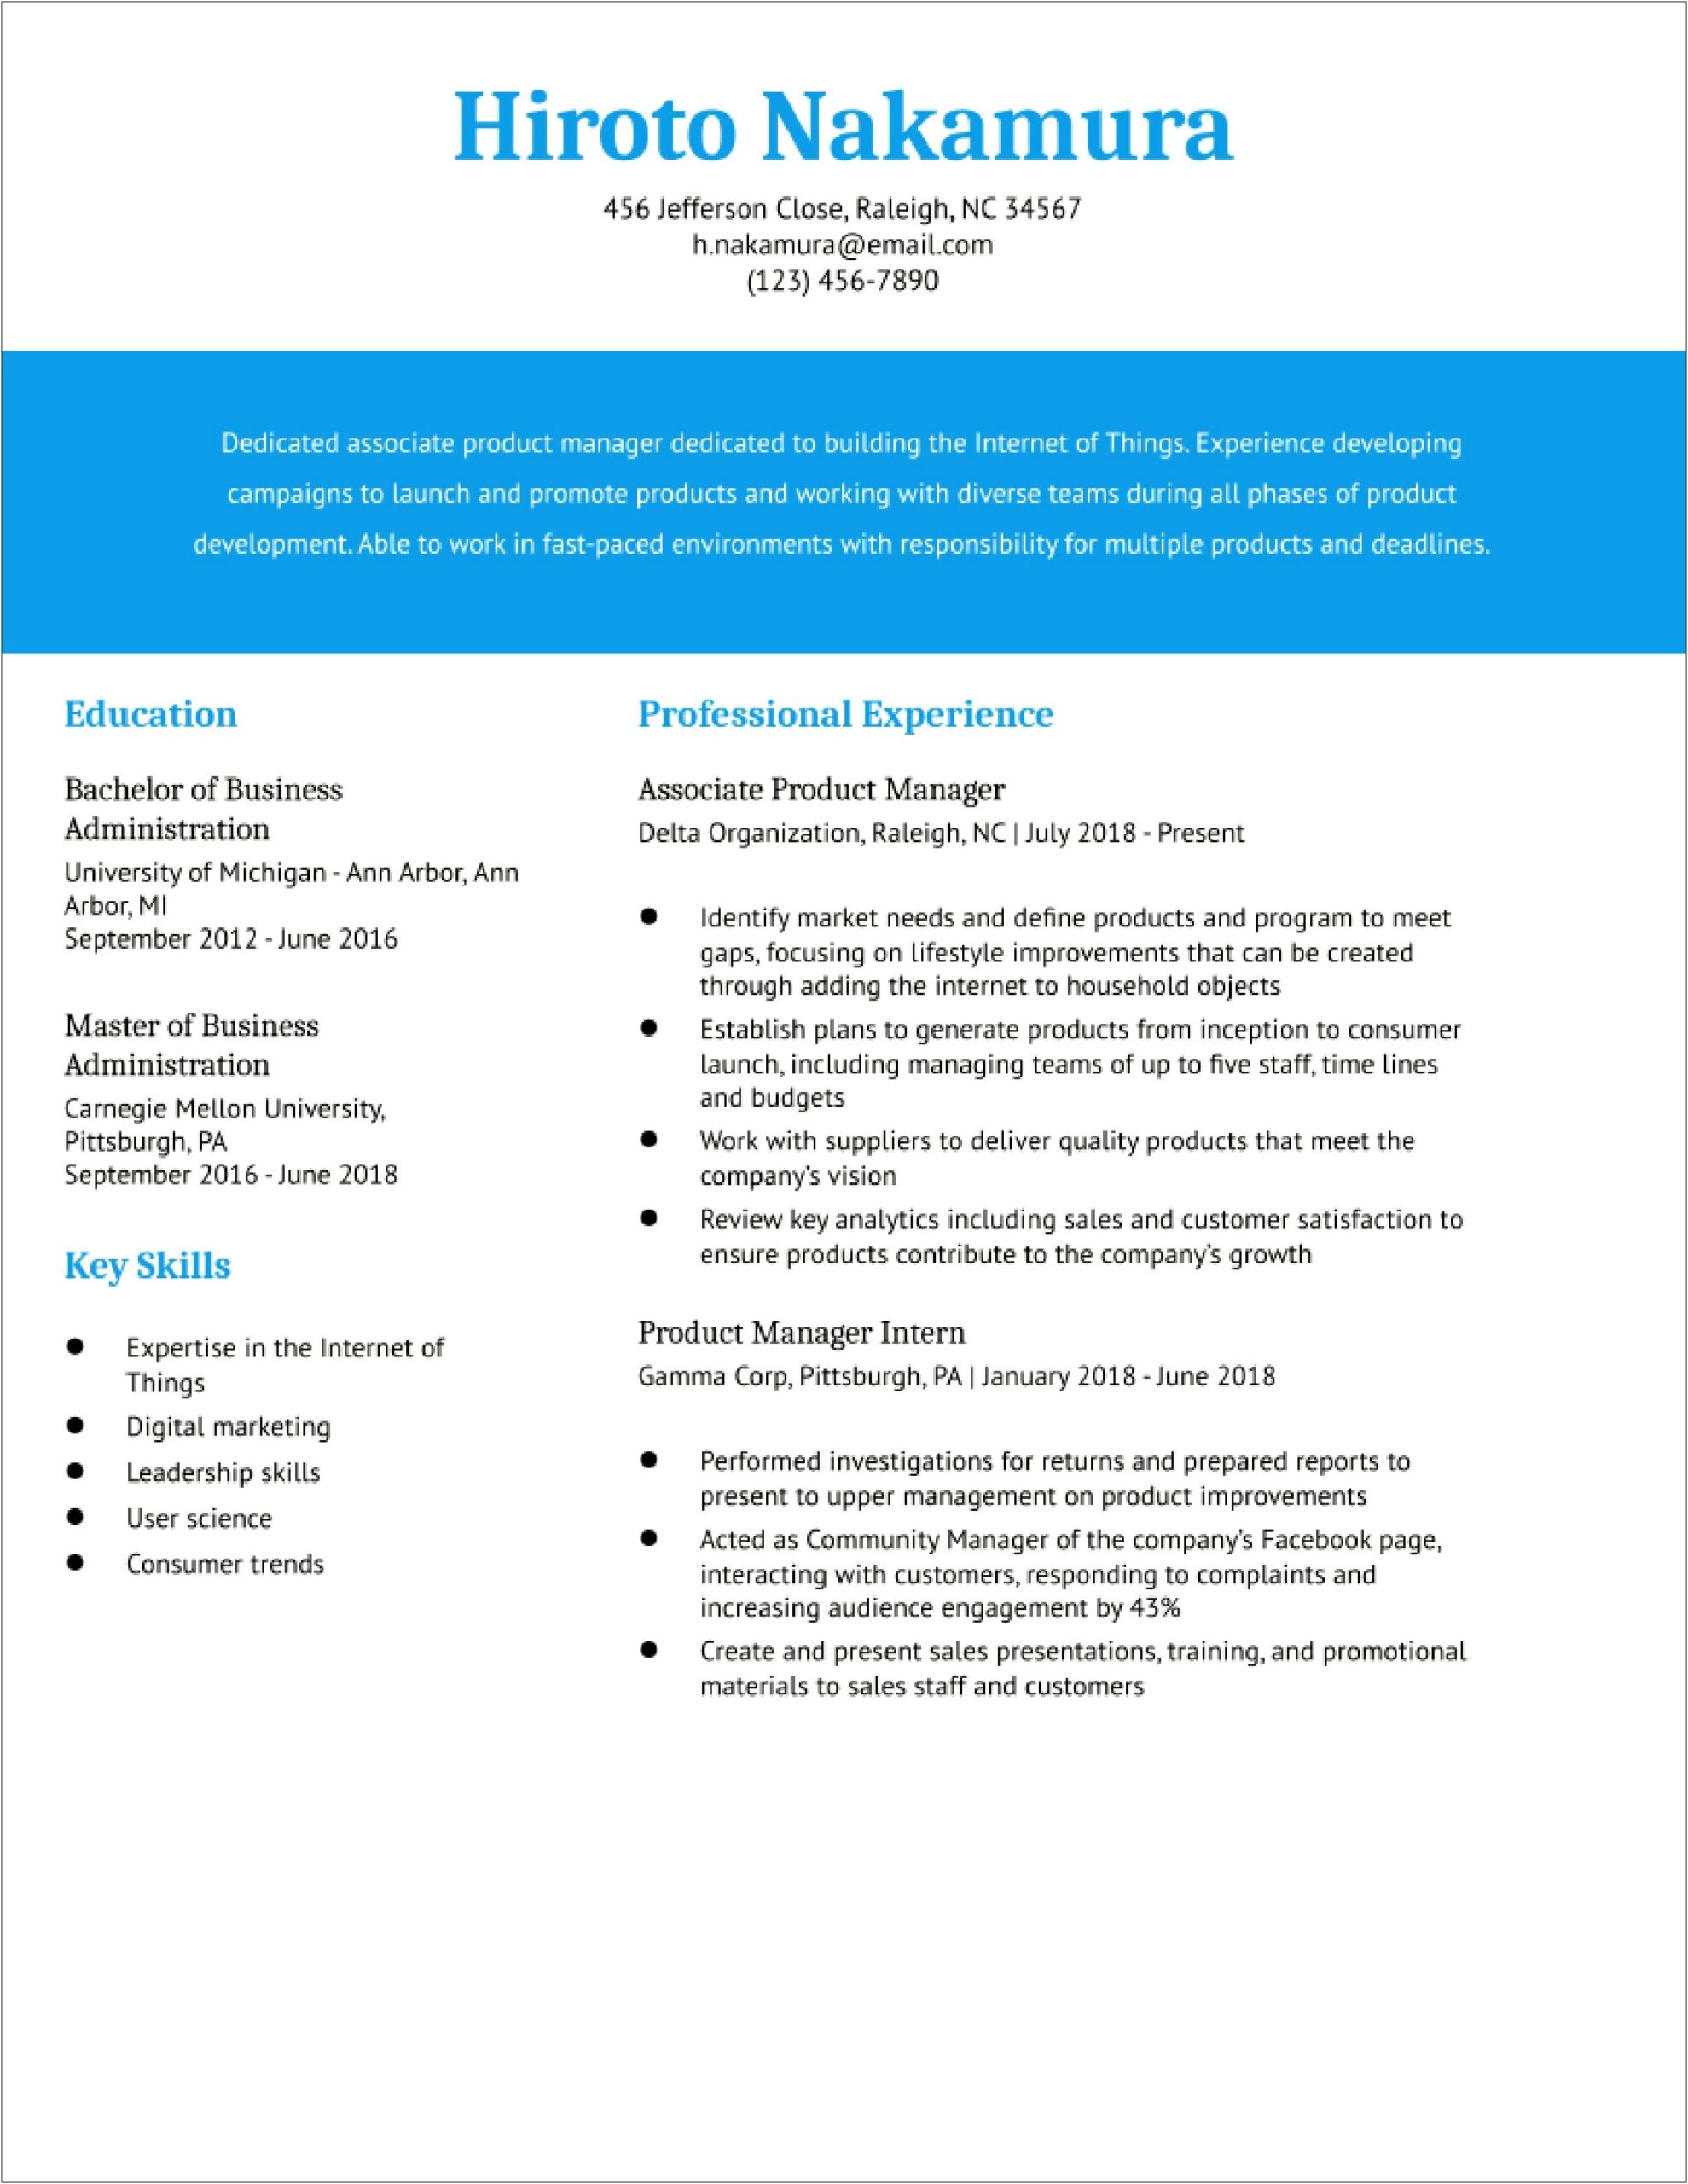 Product Manager Work Experience Examples For Resume